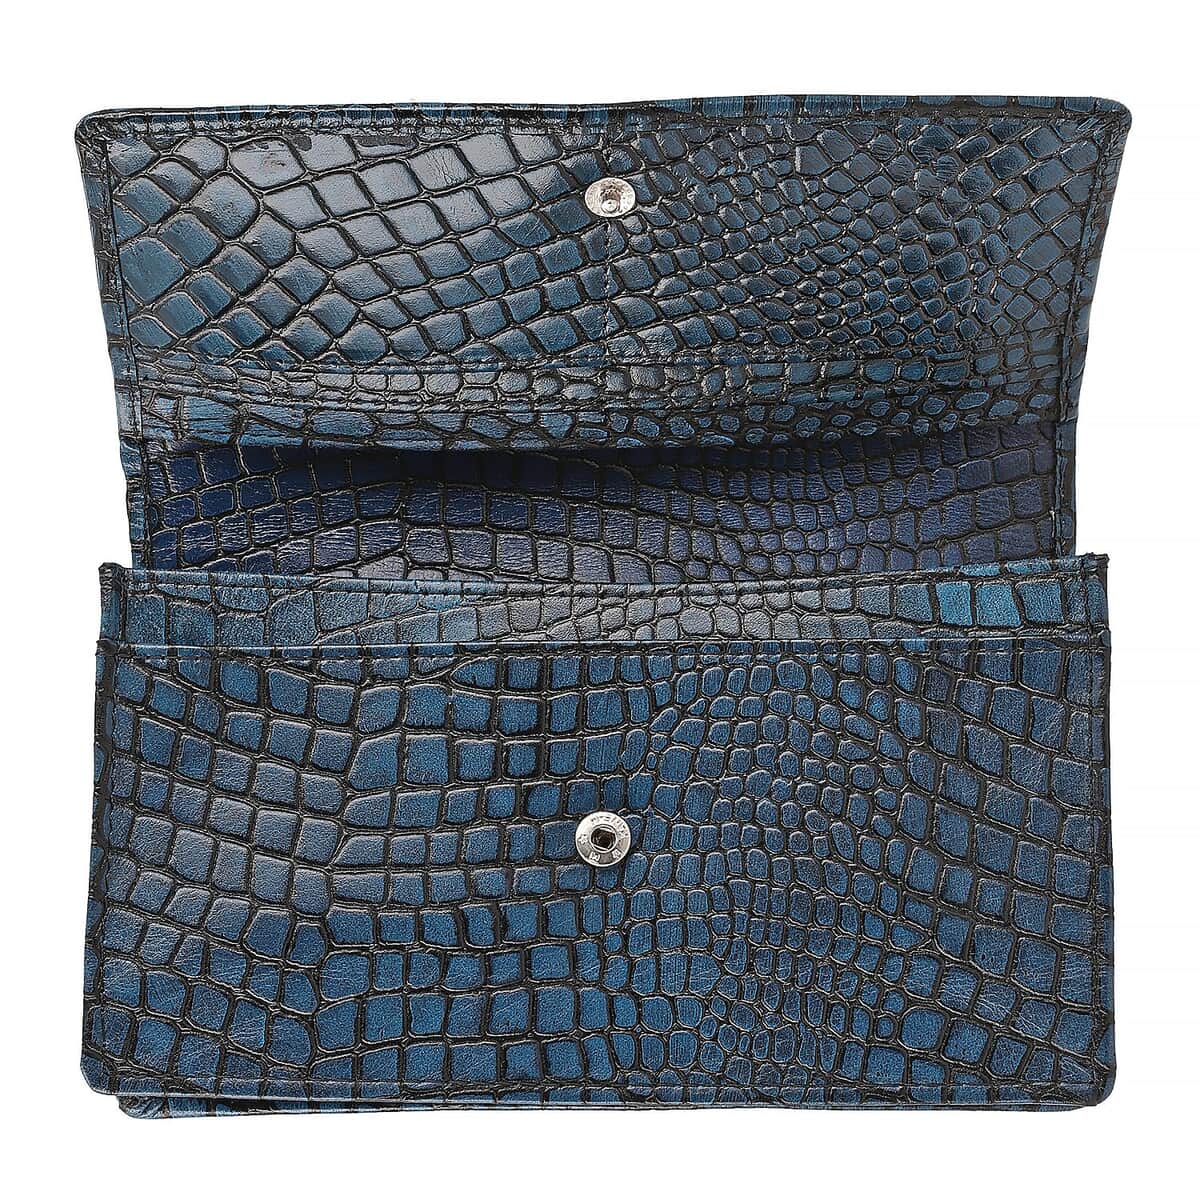 Turquoise Croco Embossed Mobile Case Genuine Leather Crossbody Bag for Women with Detachable Shoulder Strap, Shoulder Purse, Crossbody Handbags, Designer Crossbody, Leather Handbags image number 5